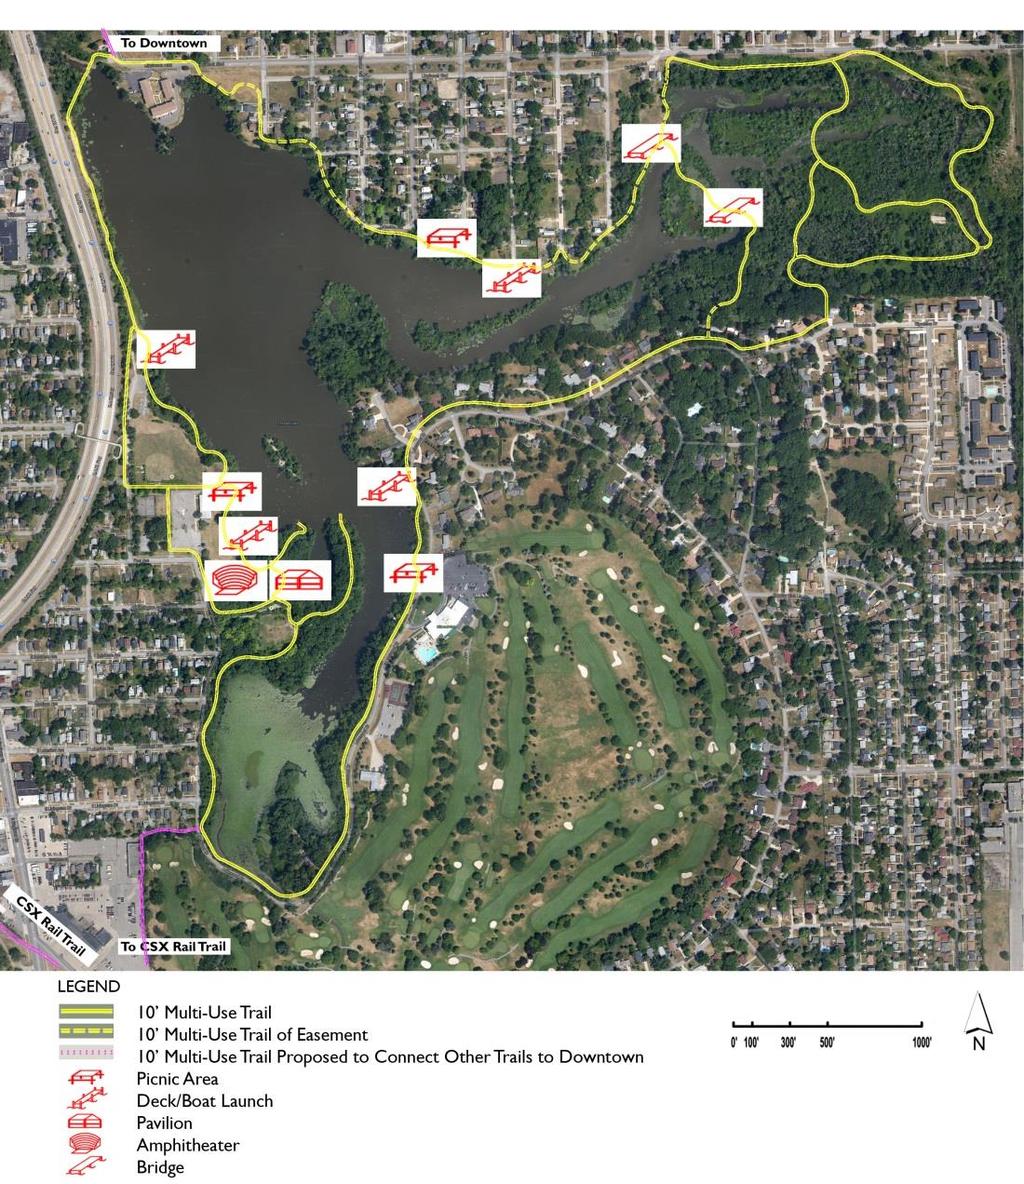 A Vision for Thread Lake- Recreational Improvements A proposed bicycle and walking path around Thread Lake, which